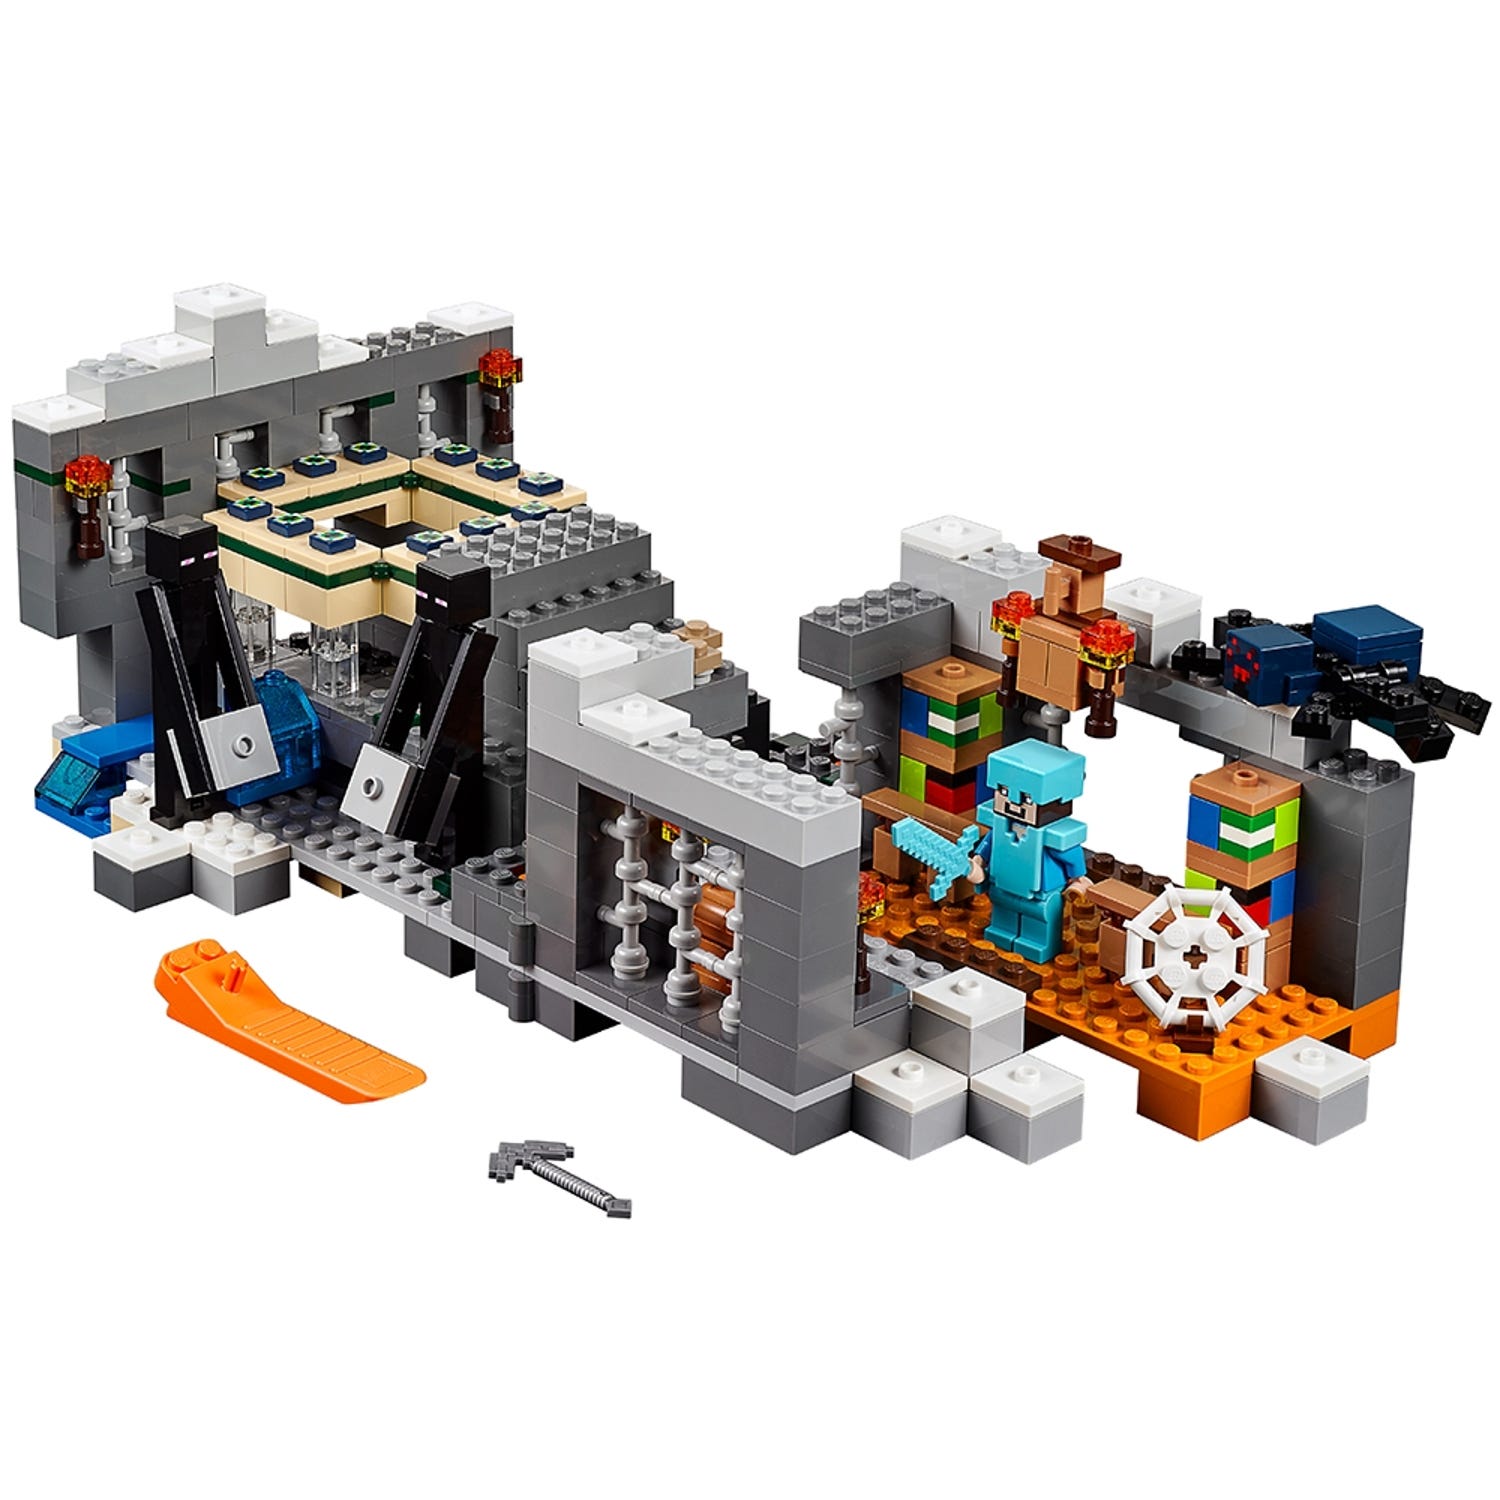 End Portal 21124 | Minecraft® Buy online at the Official LEGO® Shop